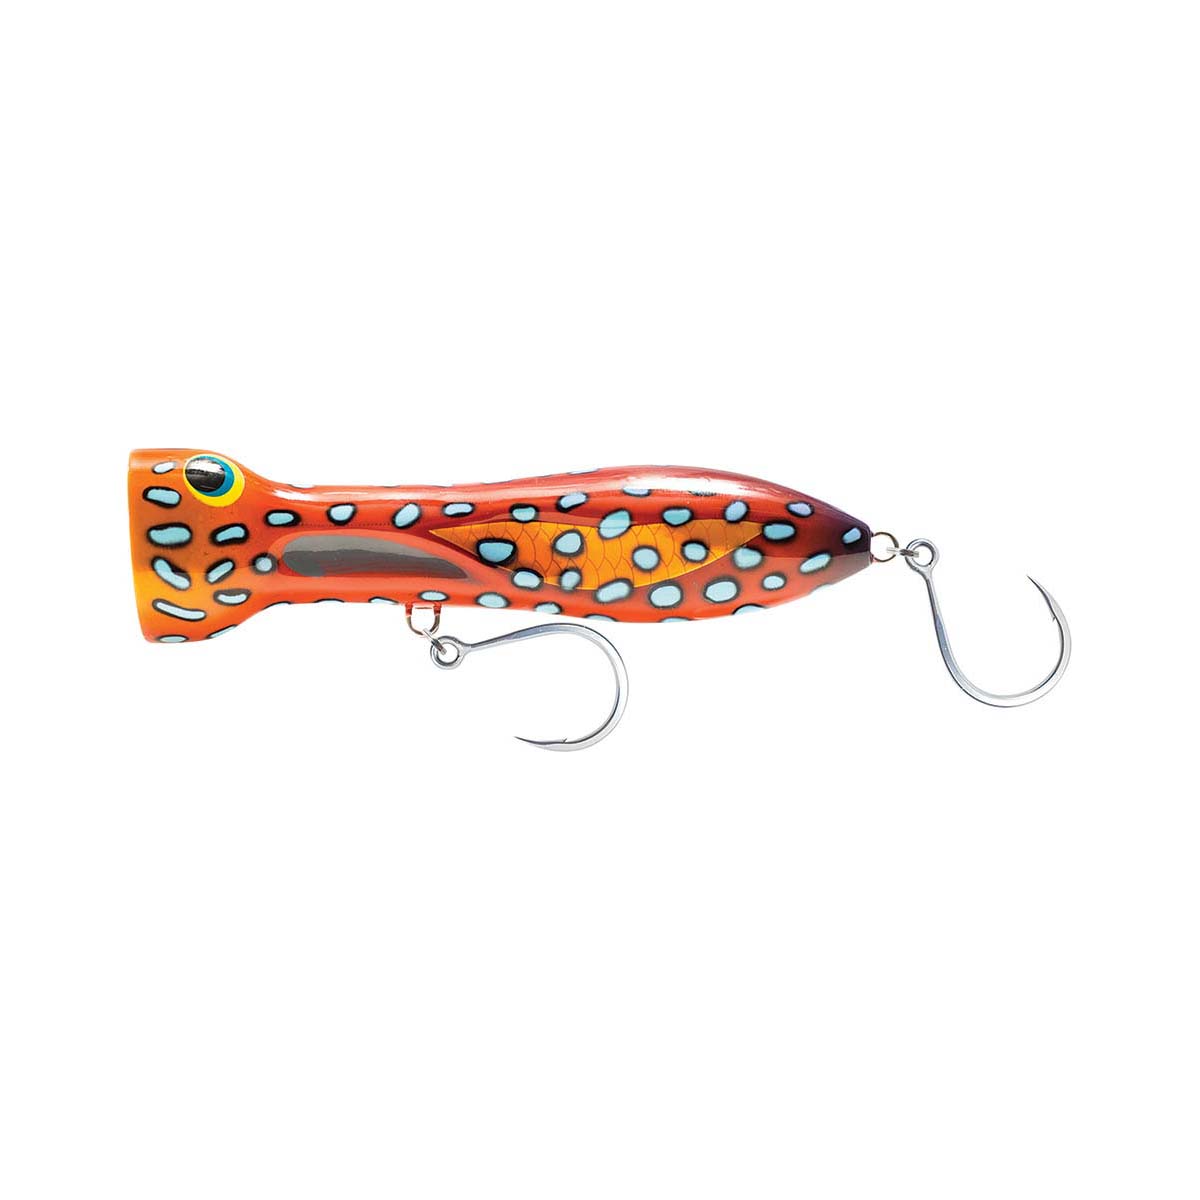 Nomad Chug Norris Surface Popper Lure 12cm Coral Trout